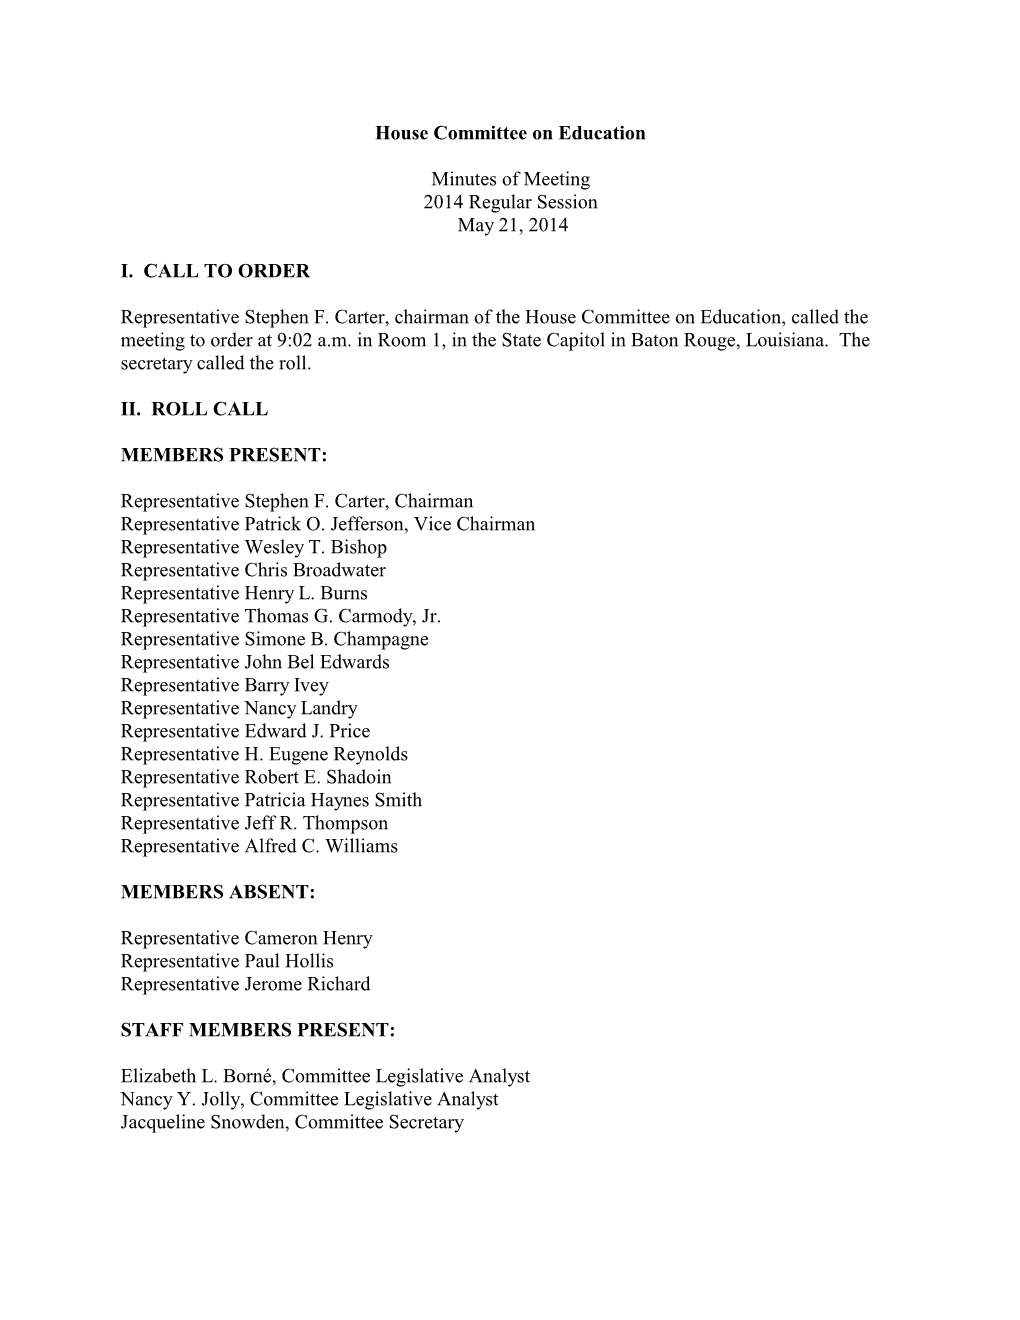 House Committee on Education Minutes of Meeting 2014 Regular